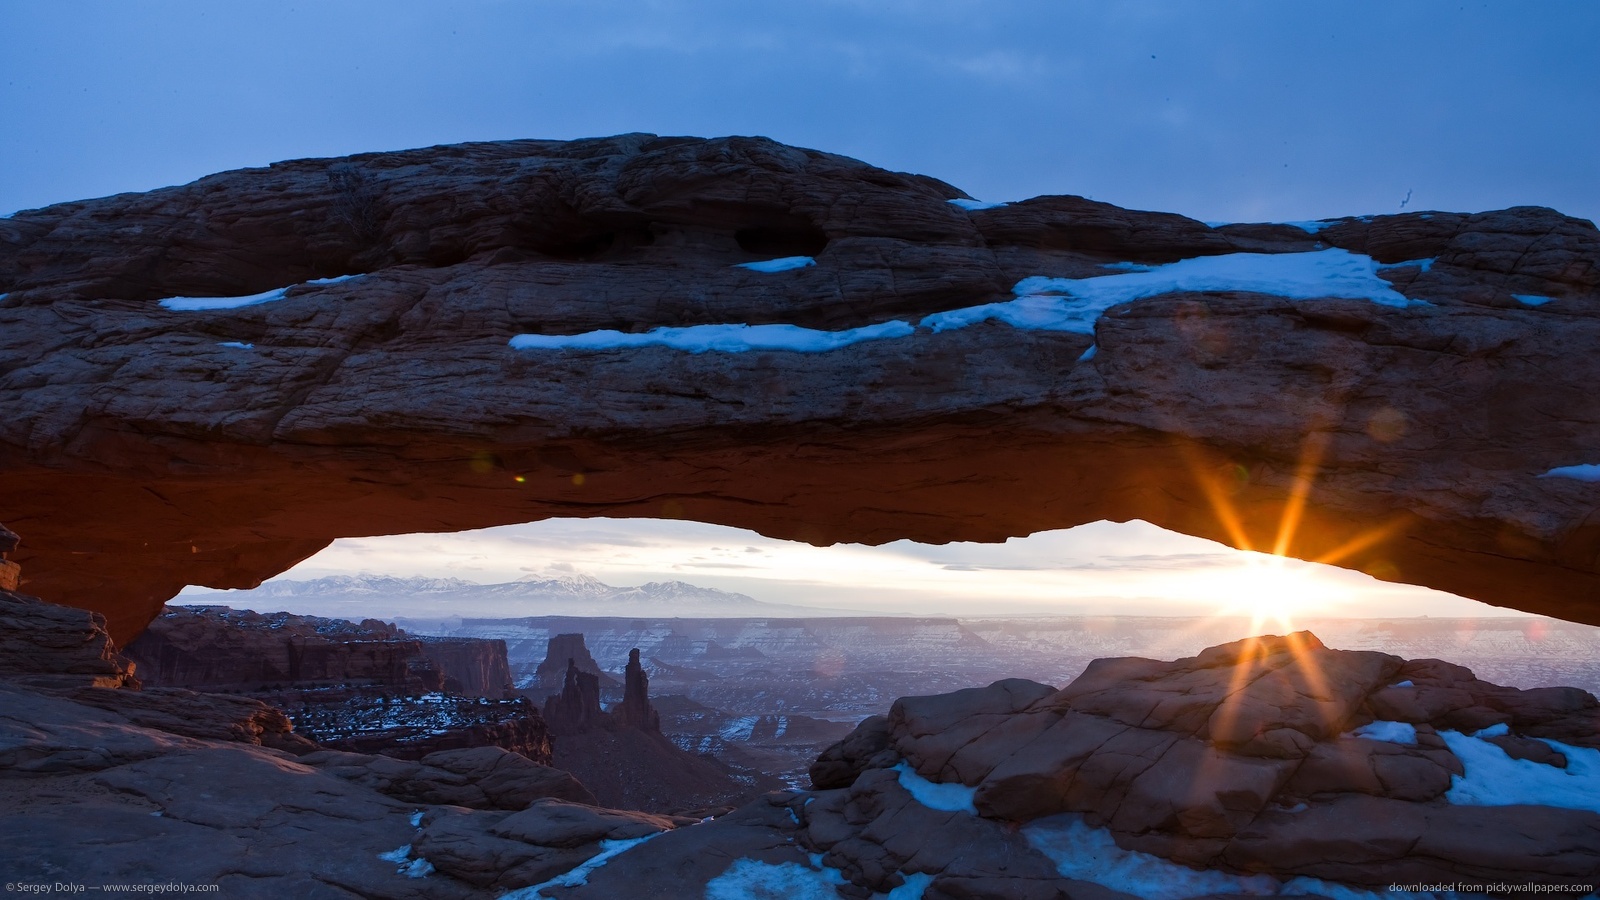 Download 1600x900 Arches National Park 1 Wallpaper